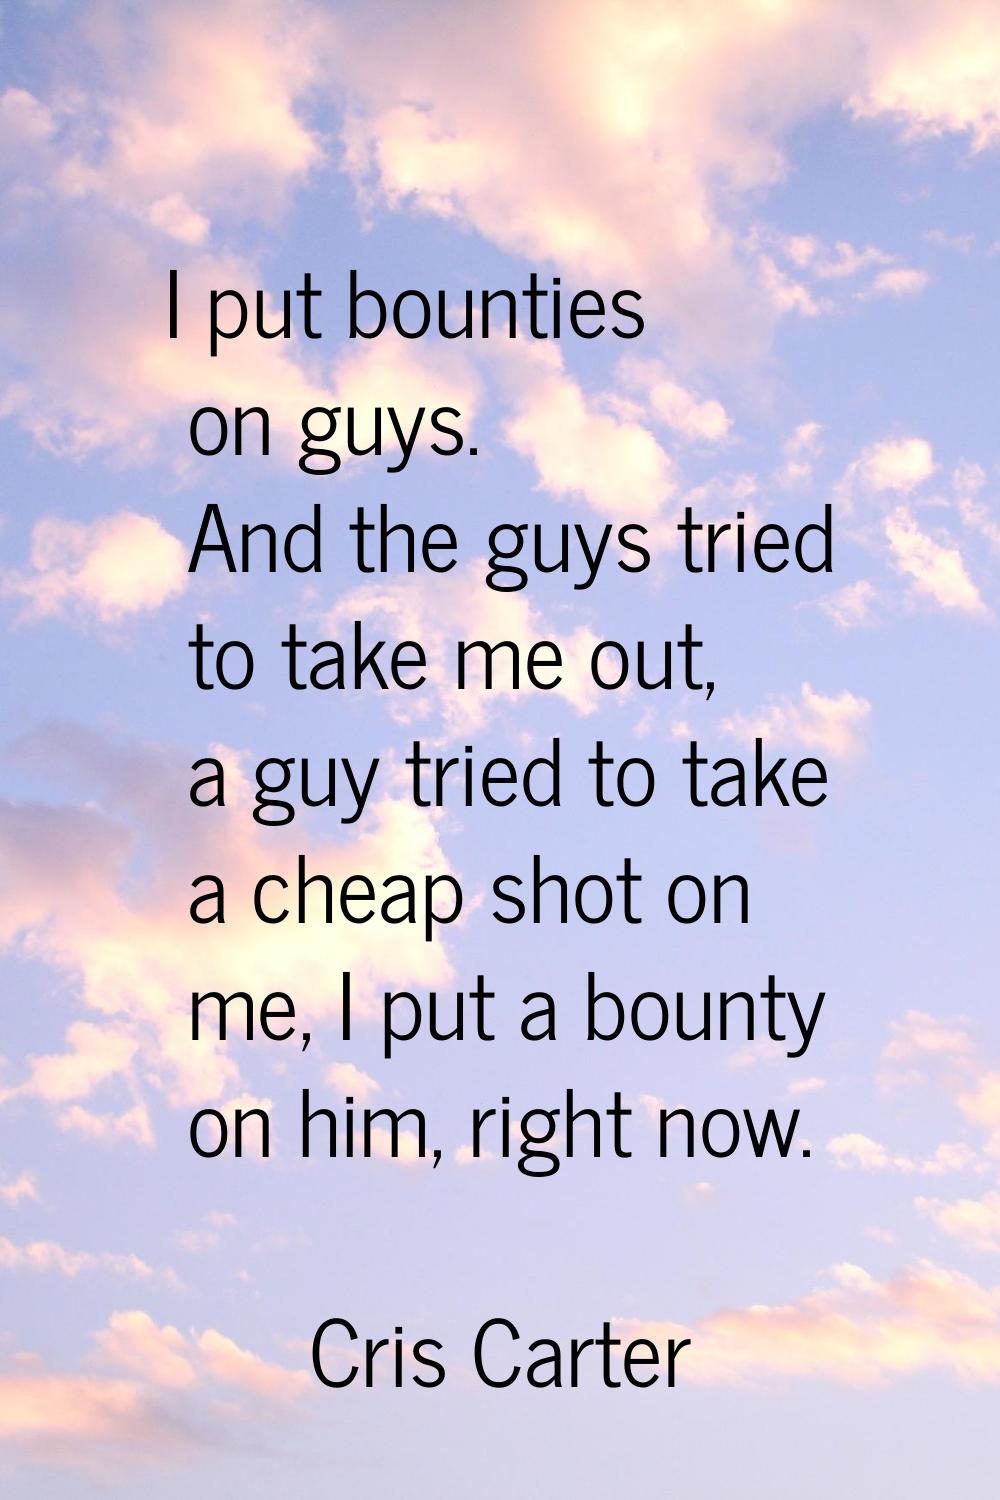 I put bounties on guys. And the guys tried to take me out, a guy tried to take a cheap shot on me, 